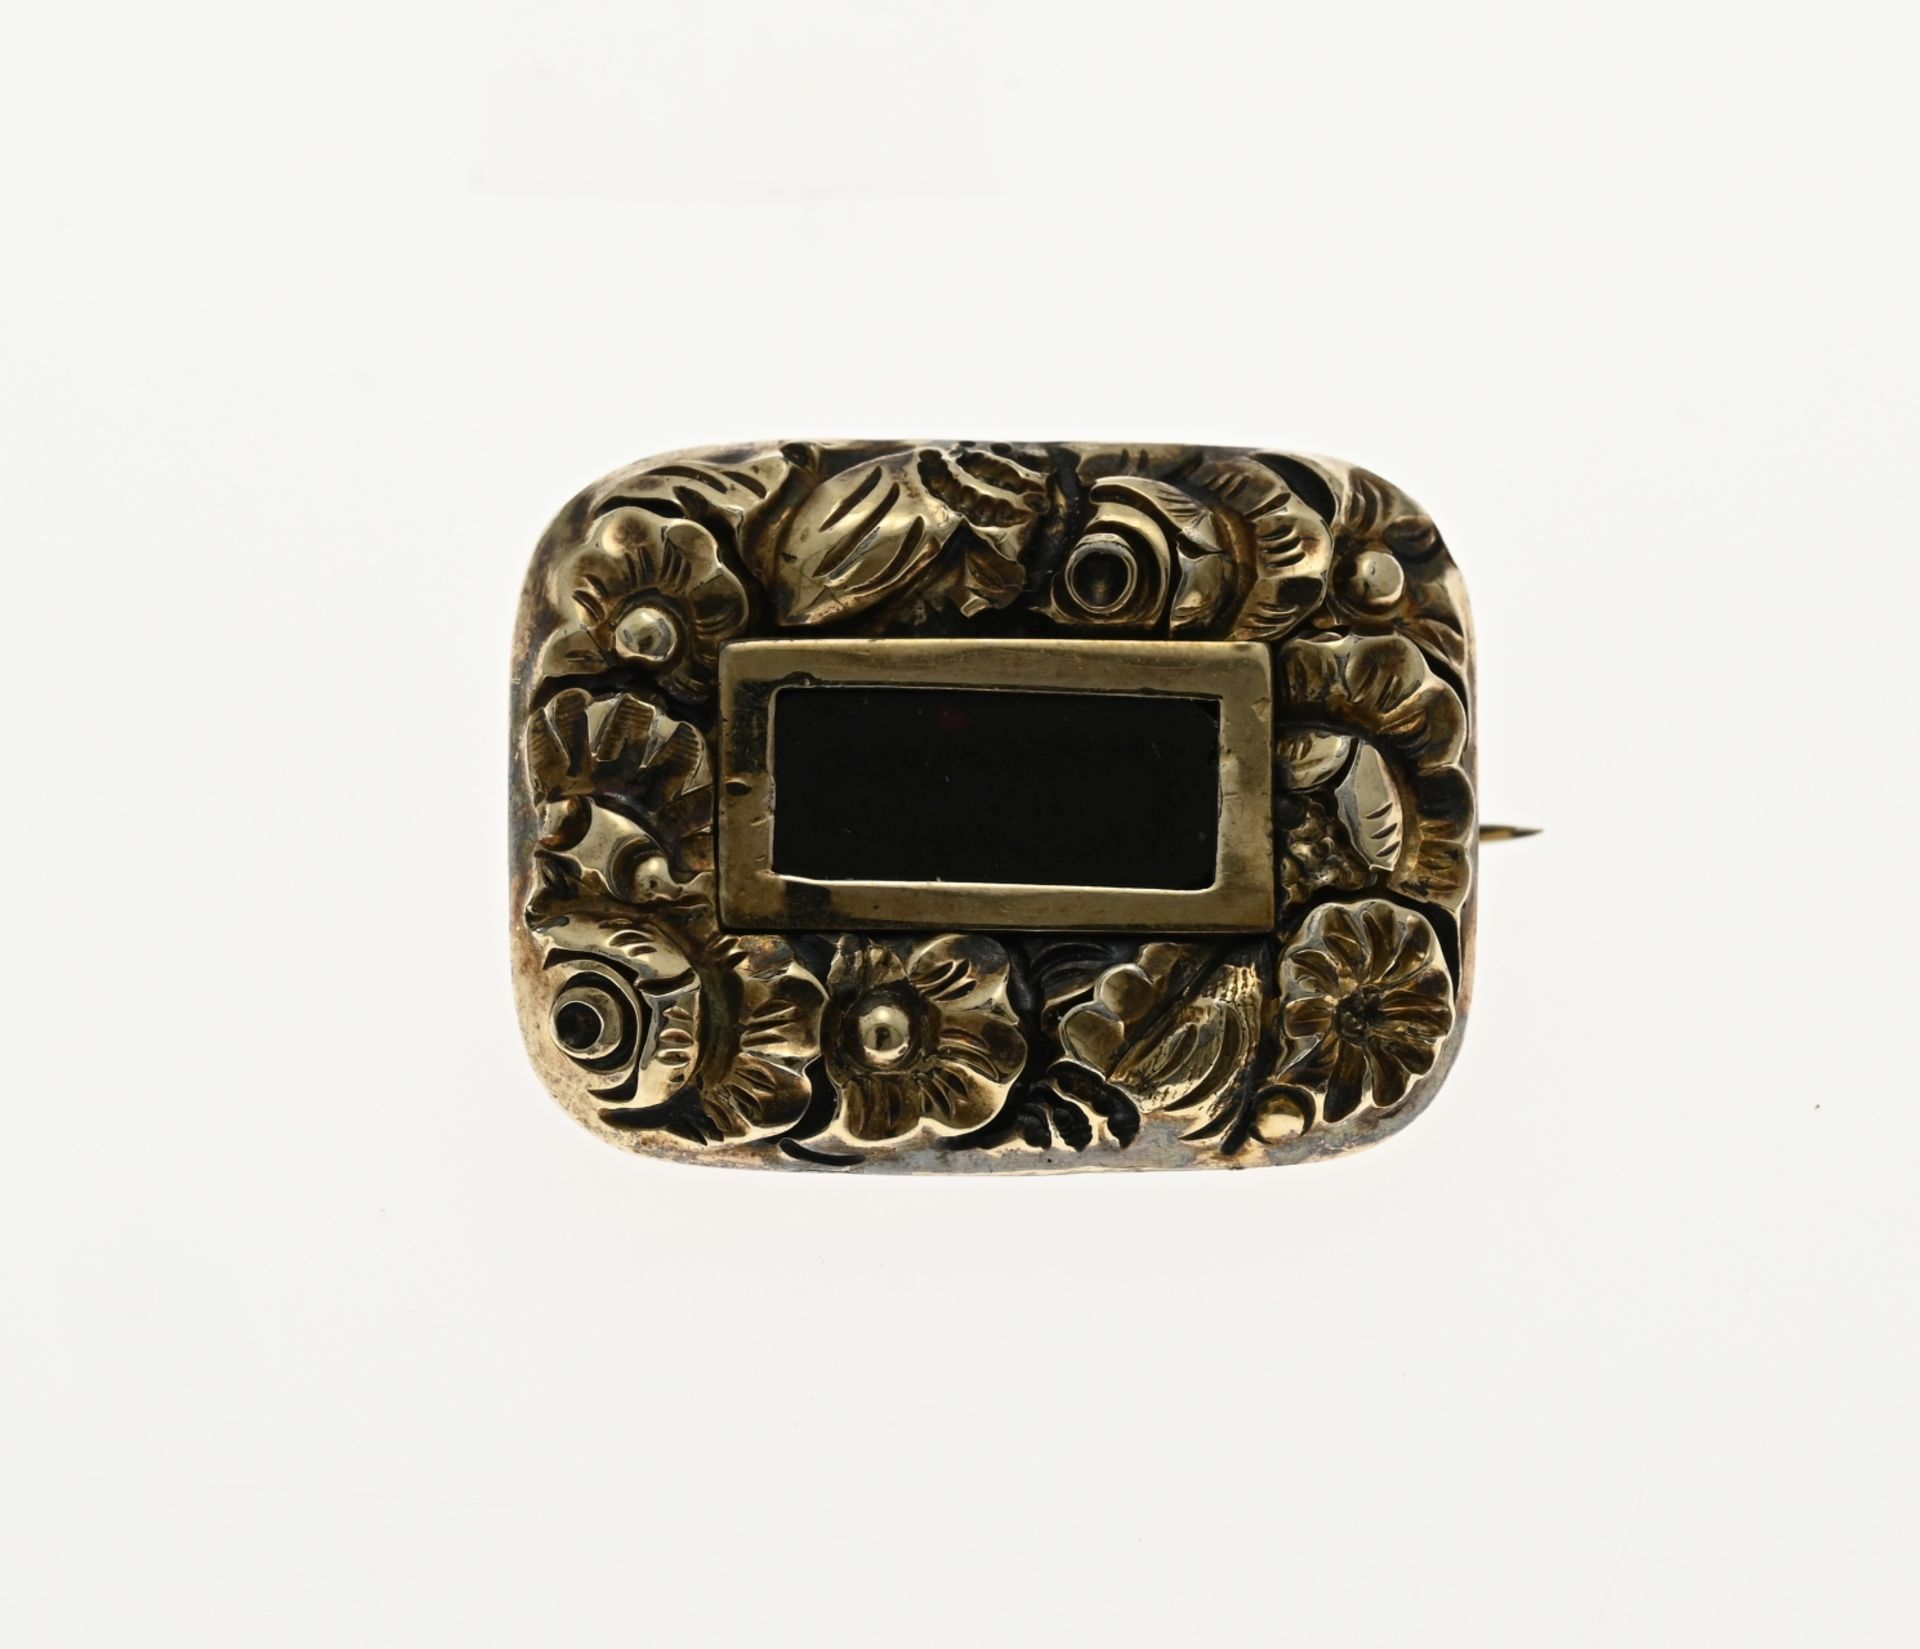 Silver plated brooch with onyx